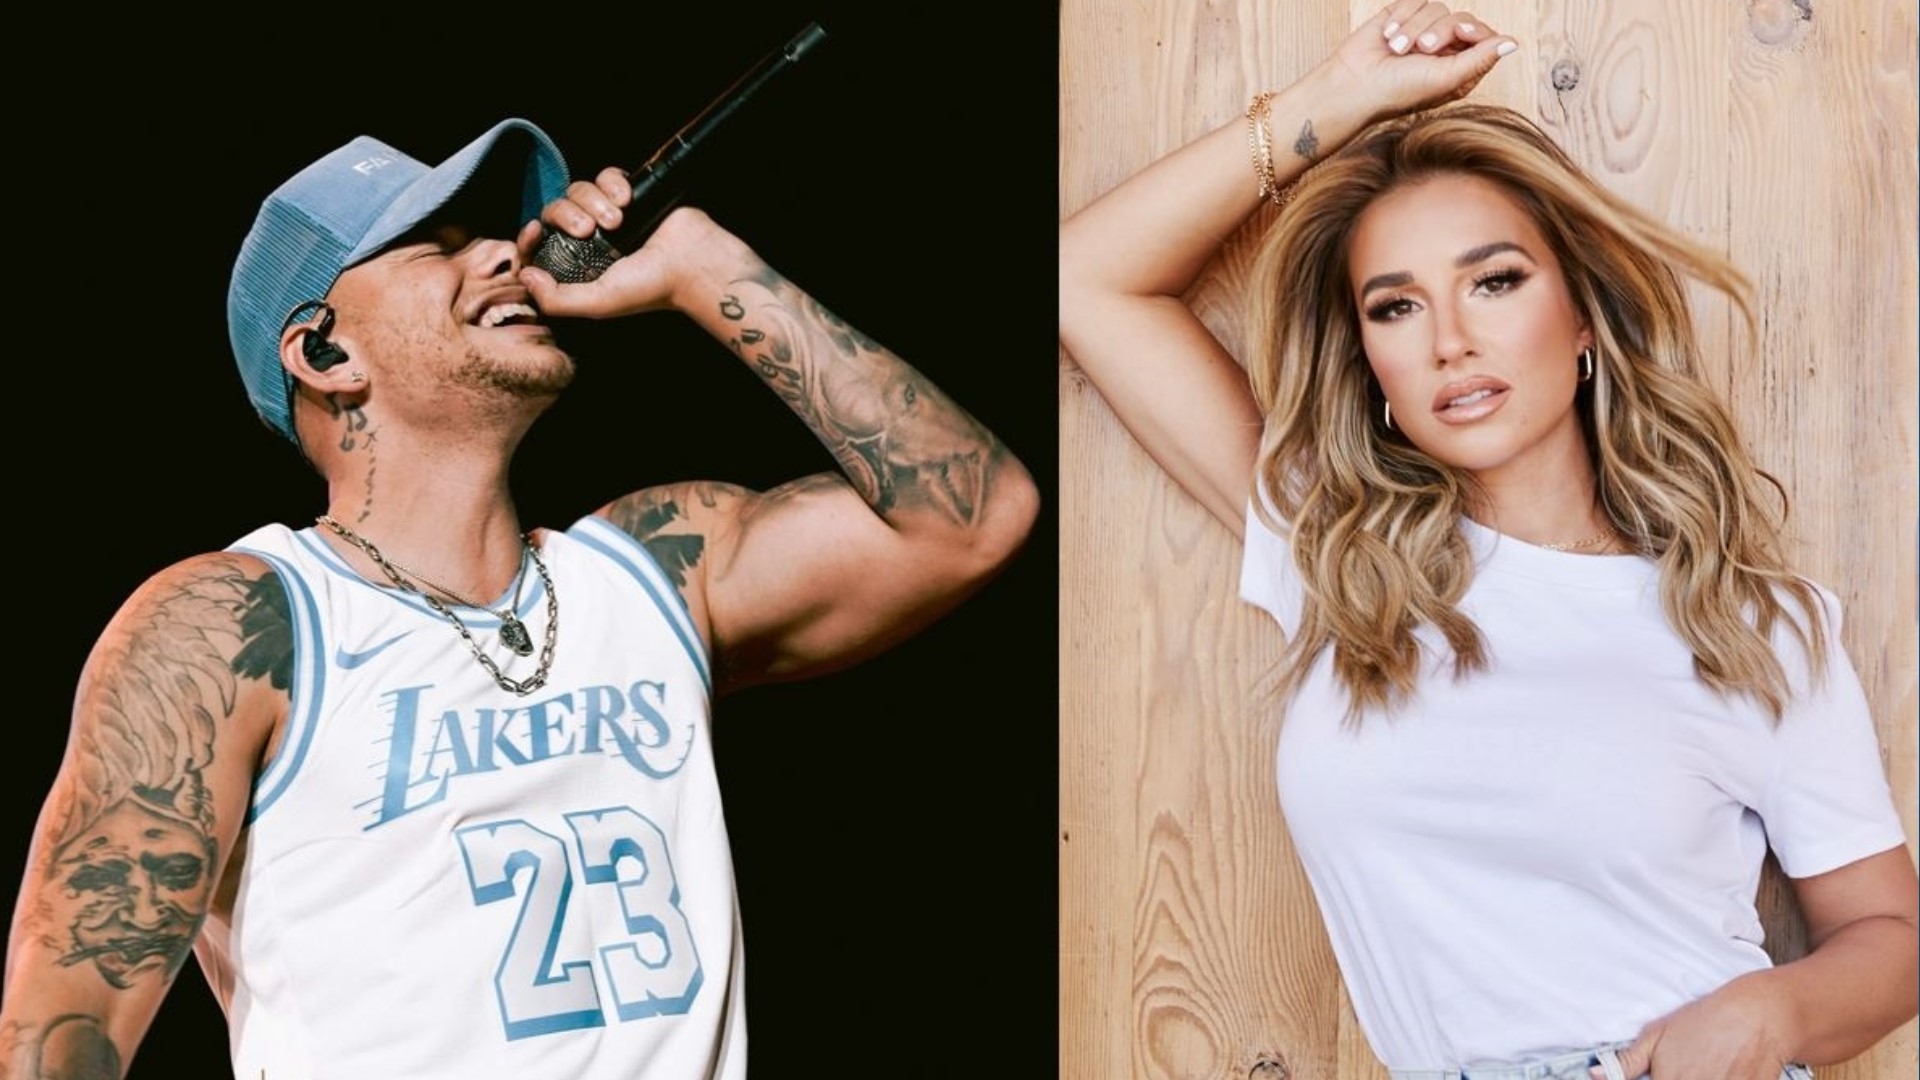 Kane Brown is set to perform with Jessie James Decker on Thursday, Aug. 18.